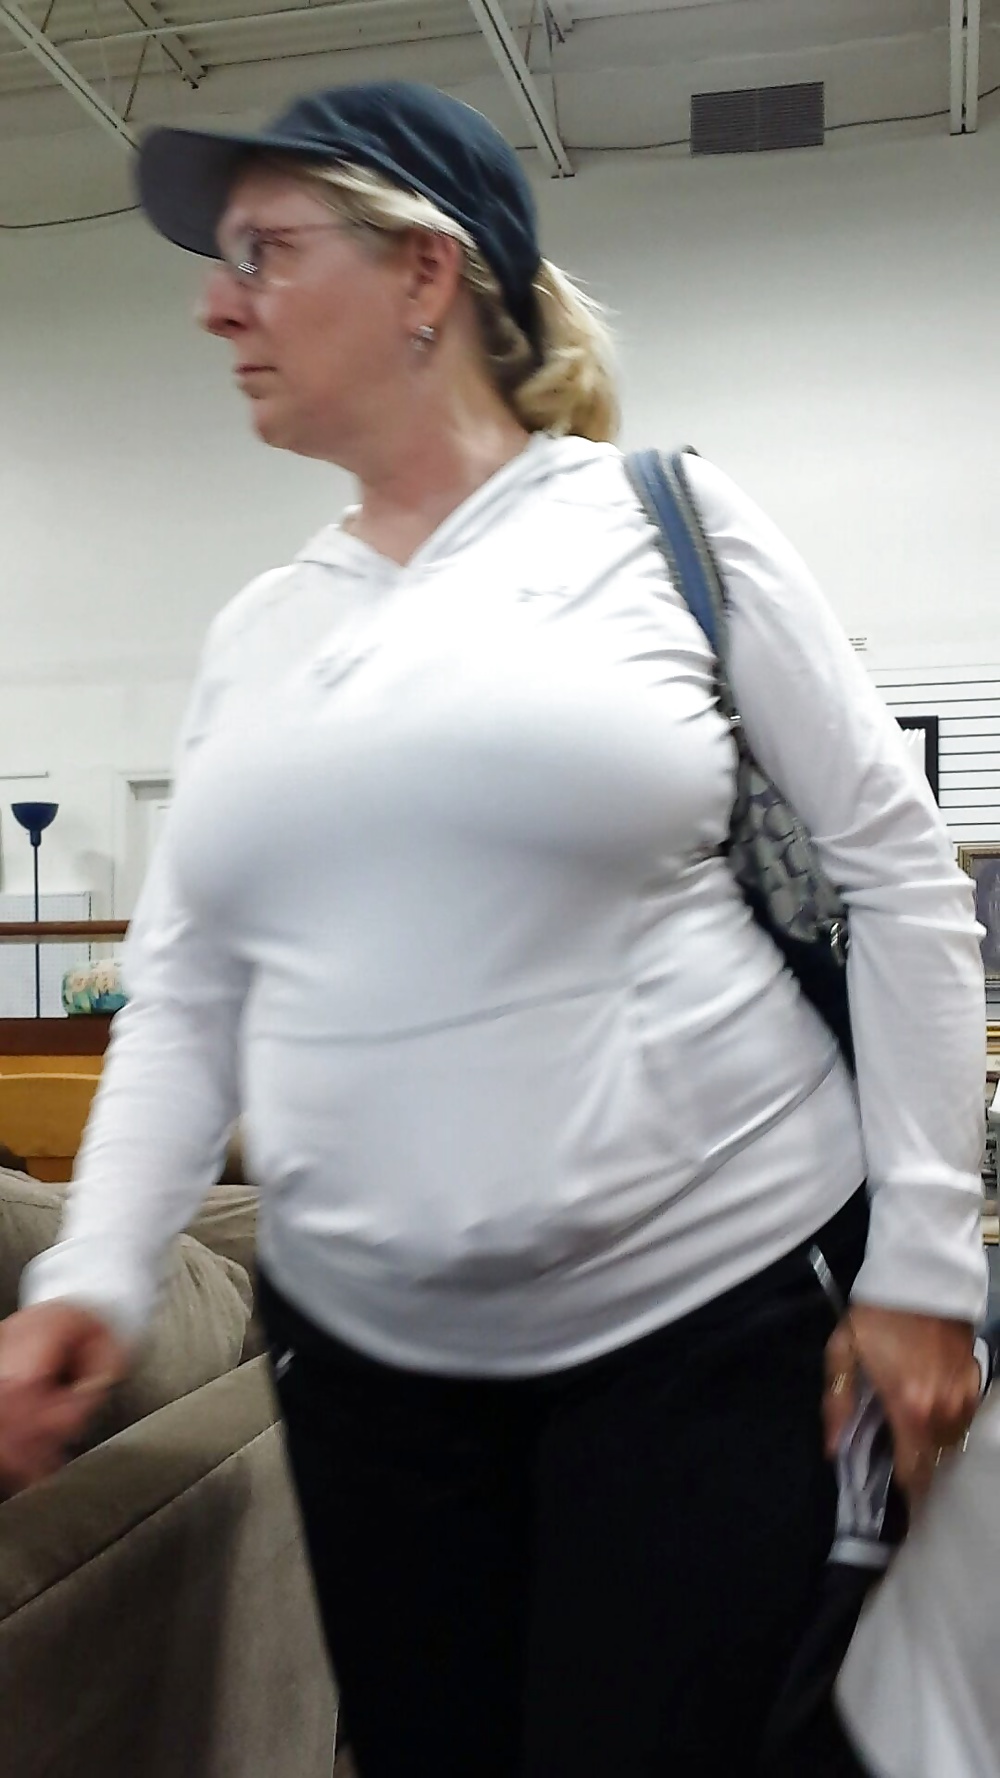 Candid mature big boobs shopping in tight top #28272702